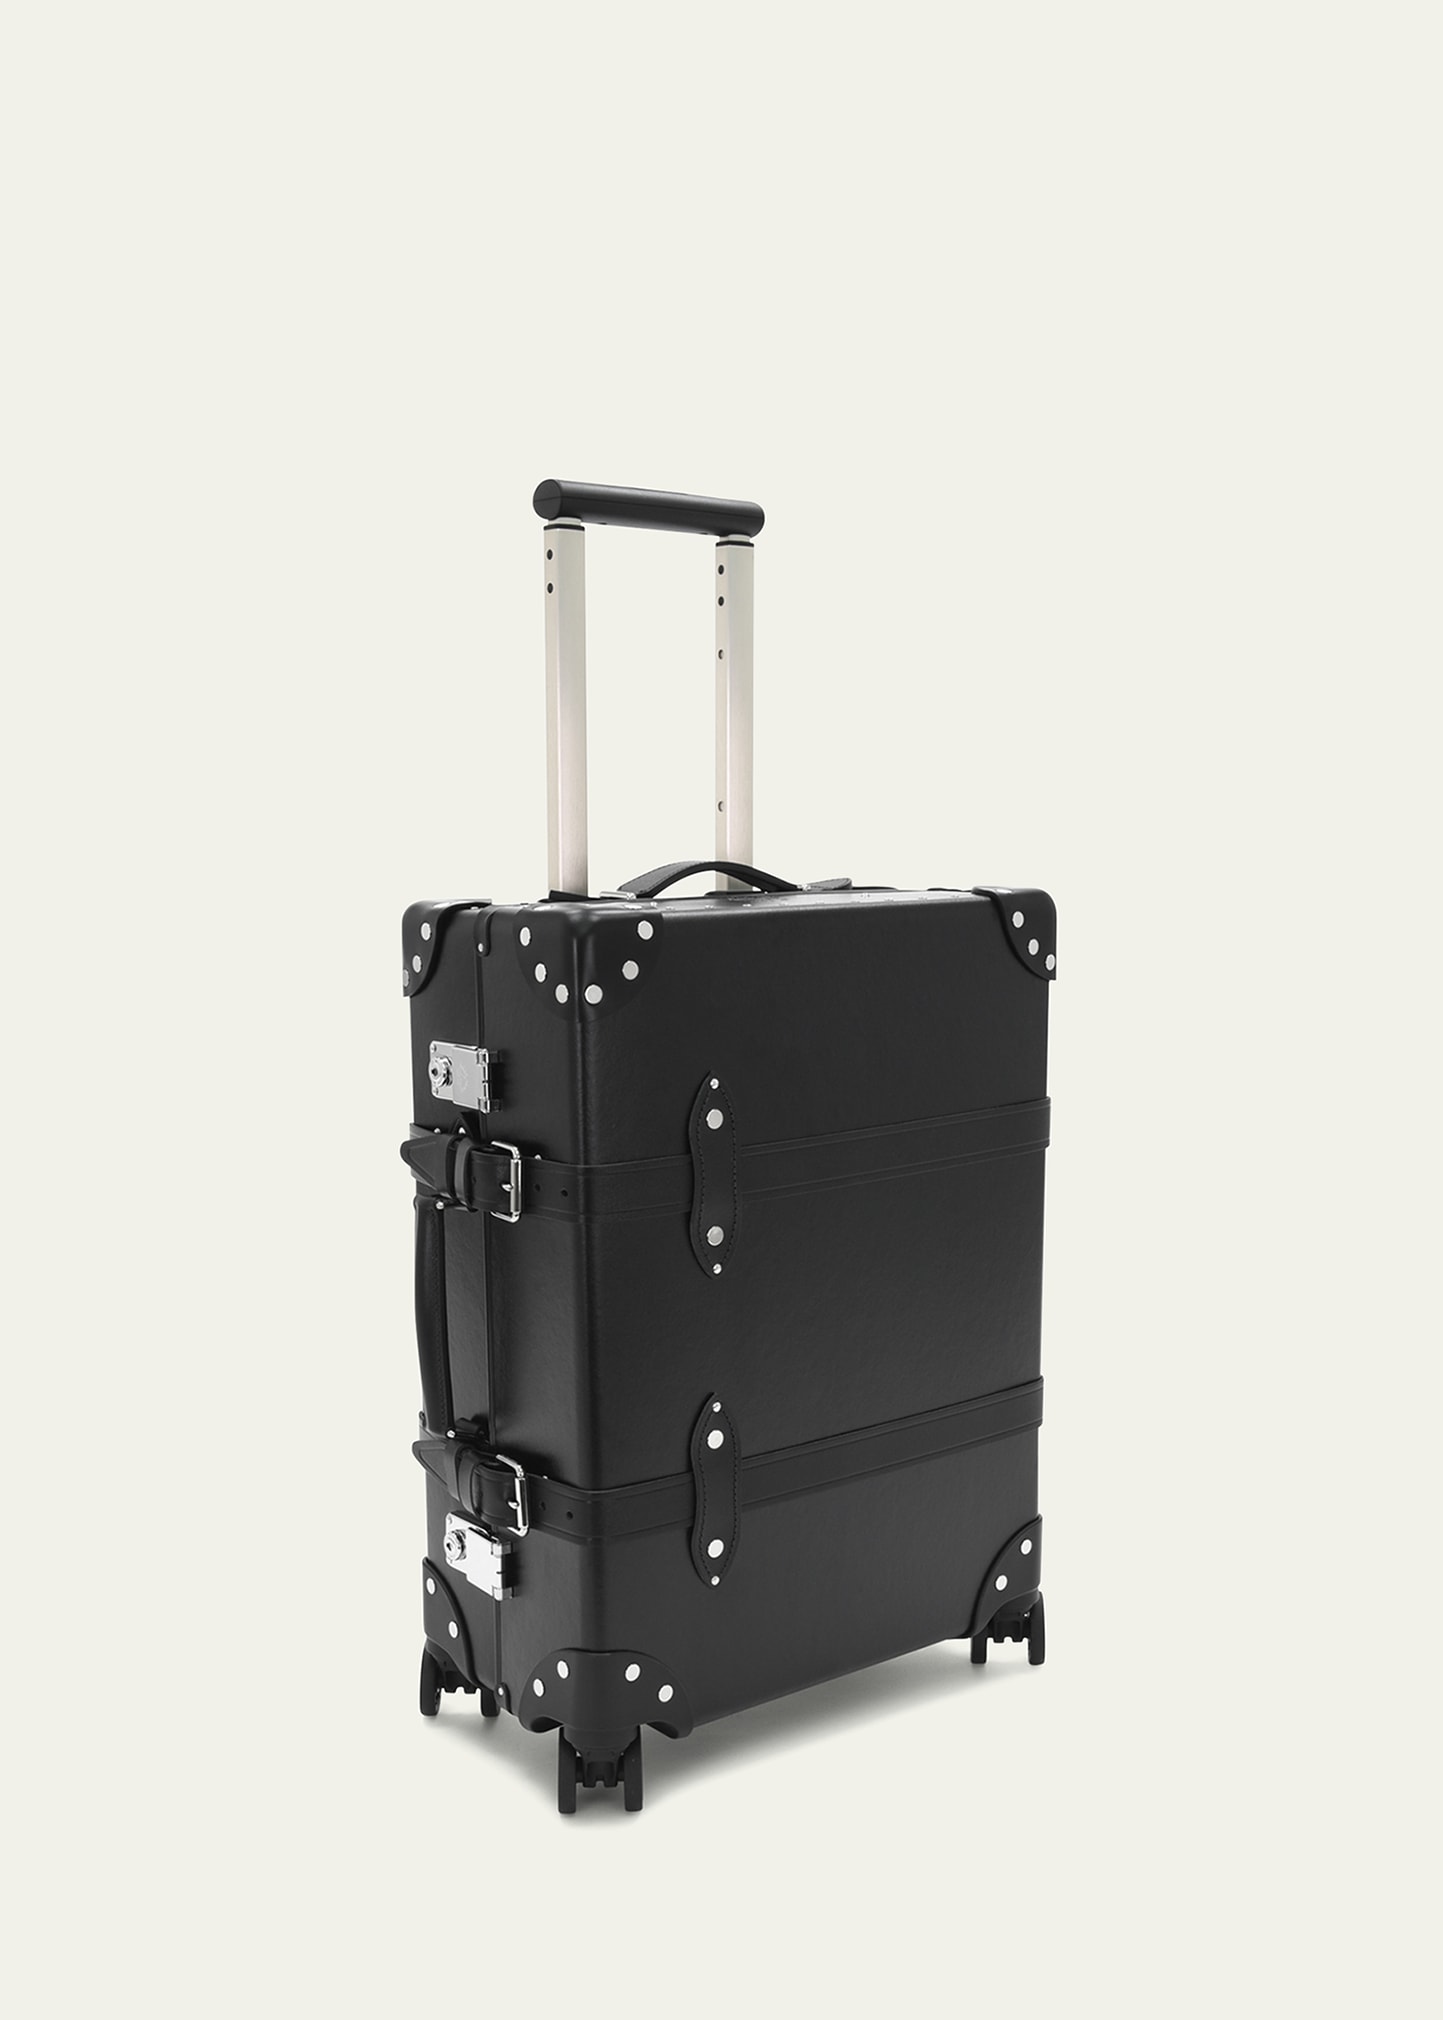 Globe Trotter Suitcase Centenary Carry-On Luggage 